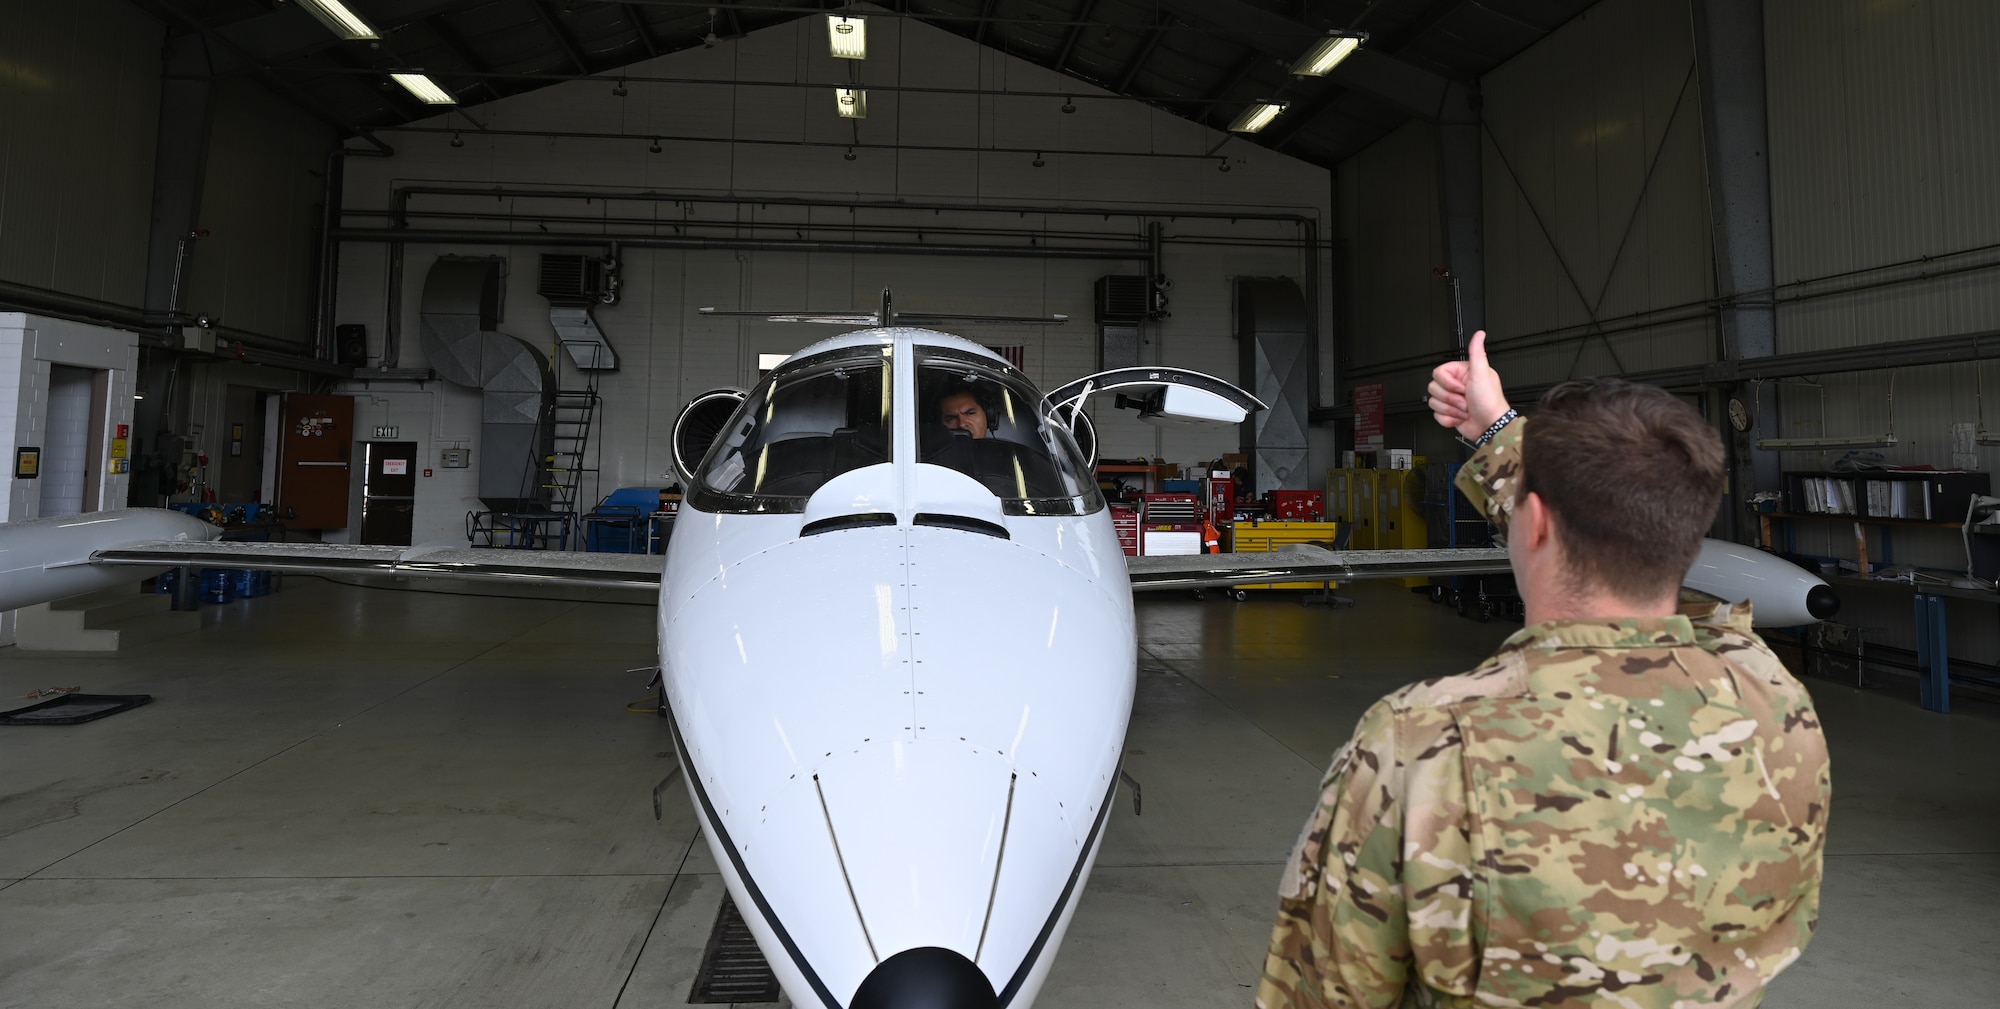 U.S. Air Force Maj. Michael Booth, 76th Airlift Squadron chief executive officer, gives a thumbs-up to Maj. Luis Garces, United States Air Forces in Europe standards and evaluations officer, during pre-flight checks at Ramstein Air Base, Germany, July 8, 2021. The 76th Airlift Squadron transports high ranking military and civilian officials across the European theater and to hotspot locations on behalf of the U.S. military. (U.S. Air Force photo by Senior Airman Thomas Karol)